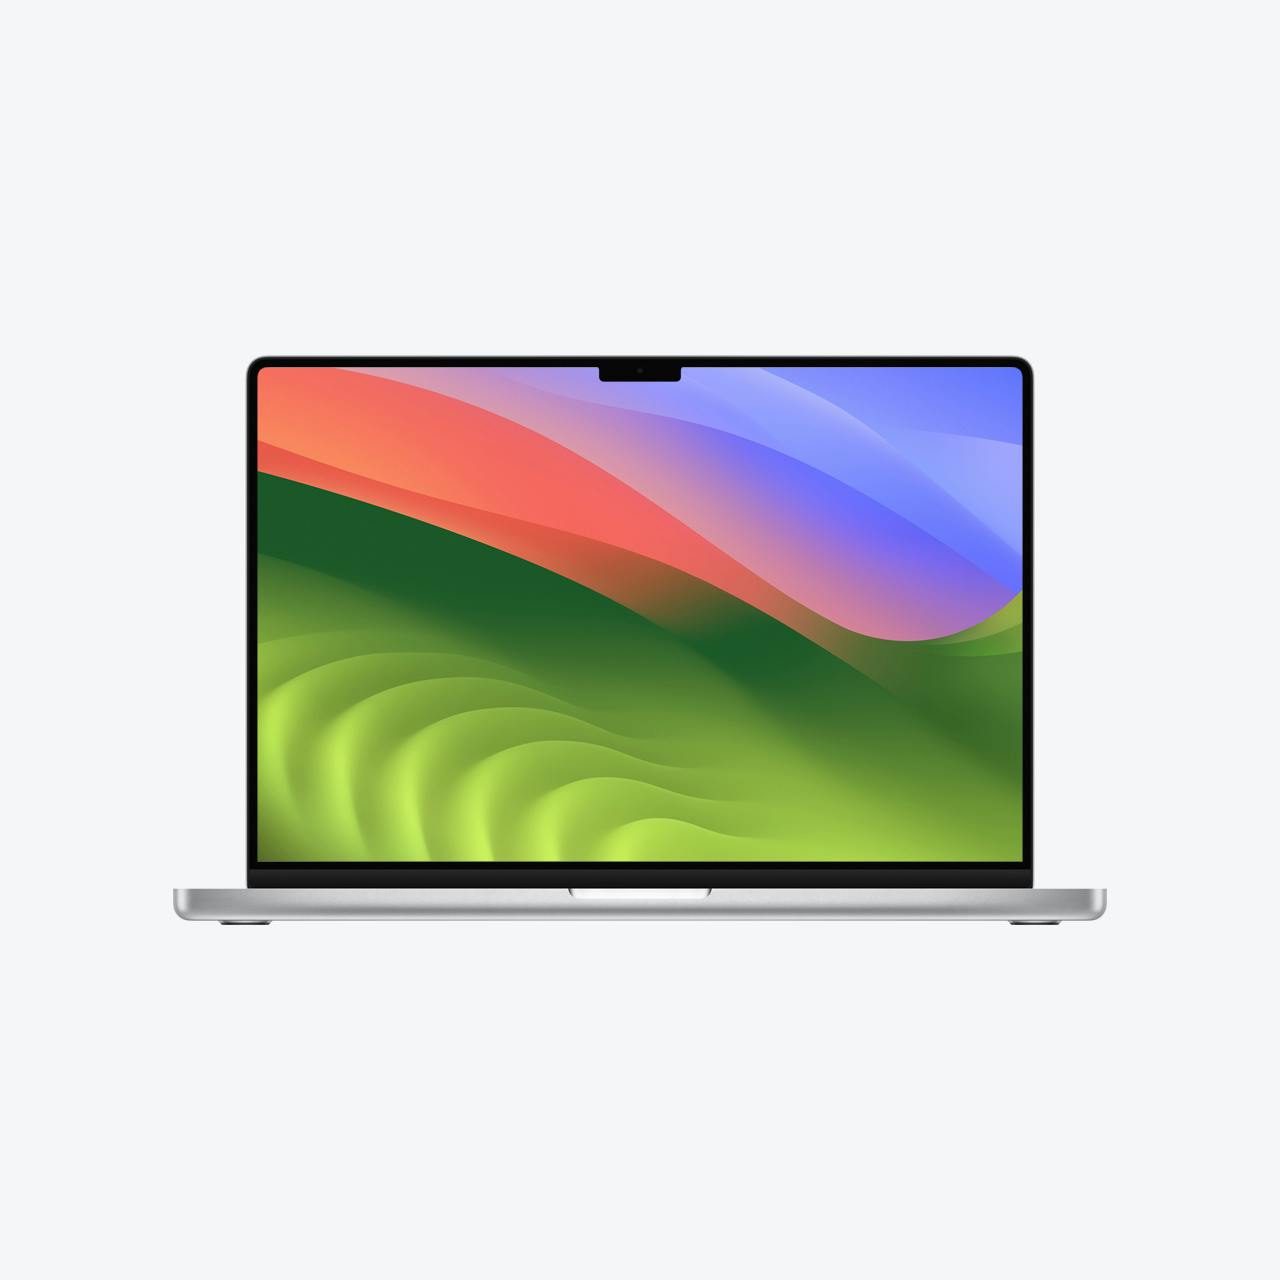 Image of a MacBook Pro